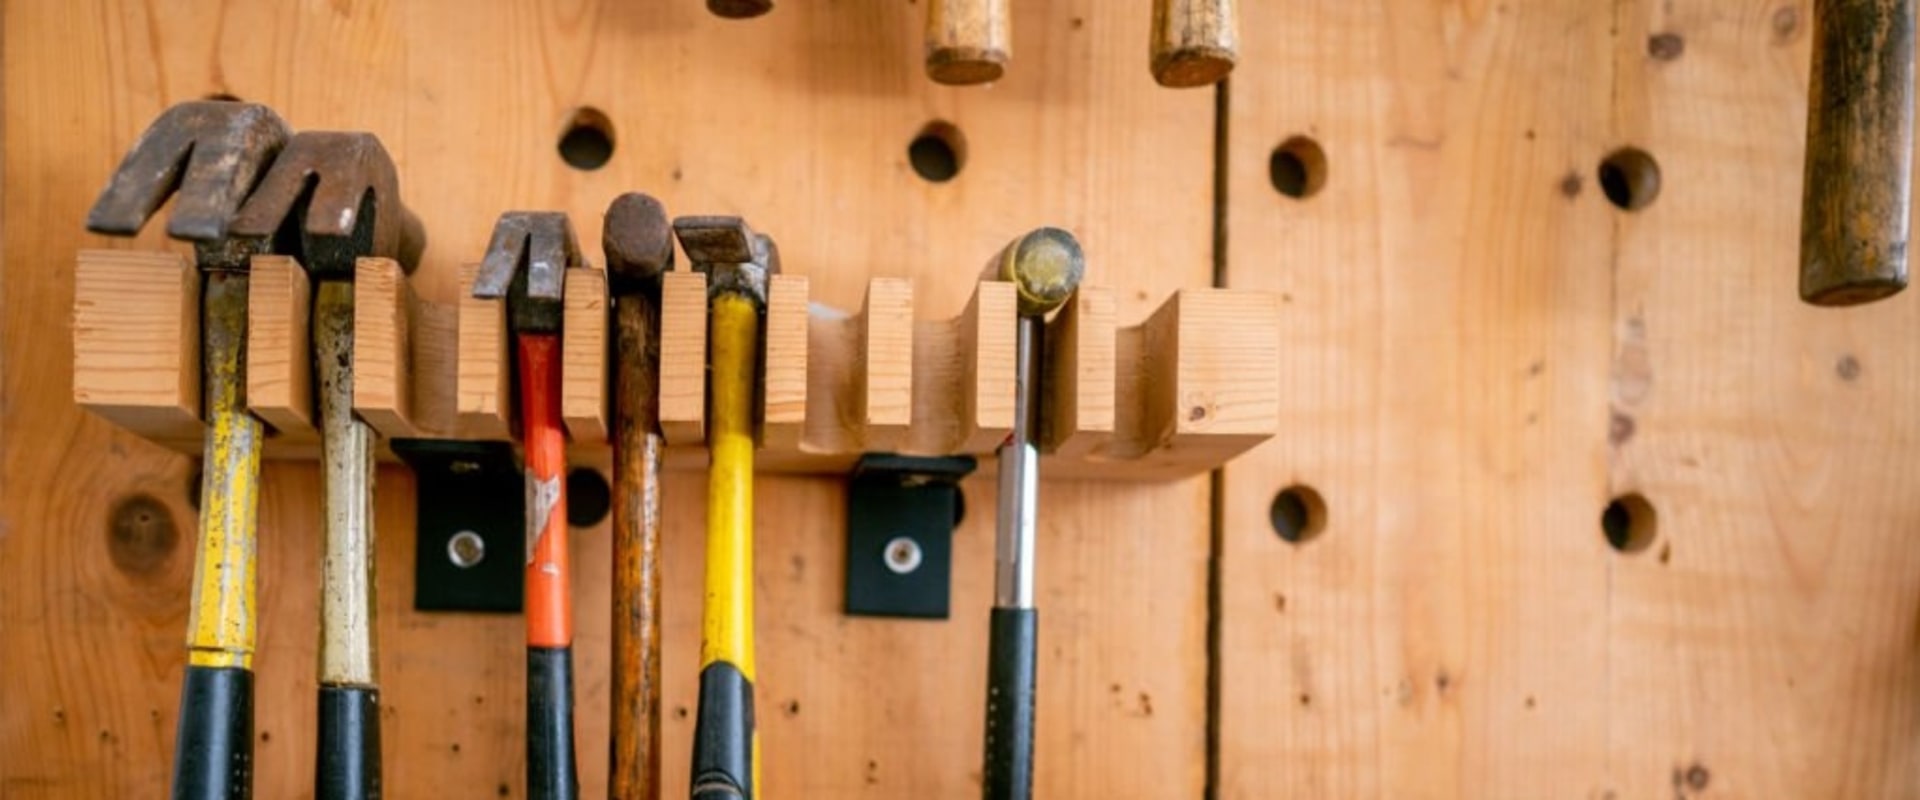 What is the most important hand tool?